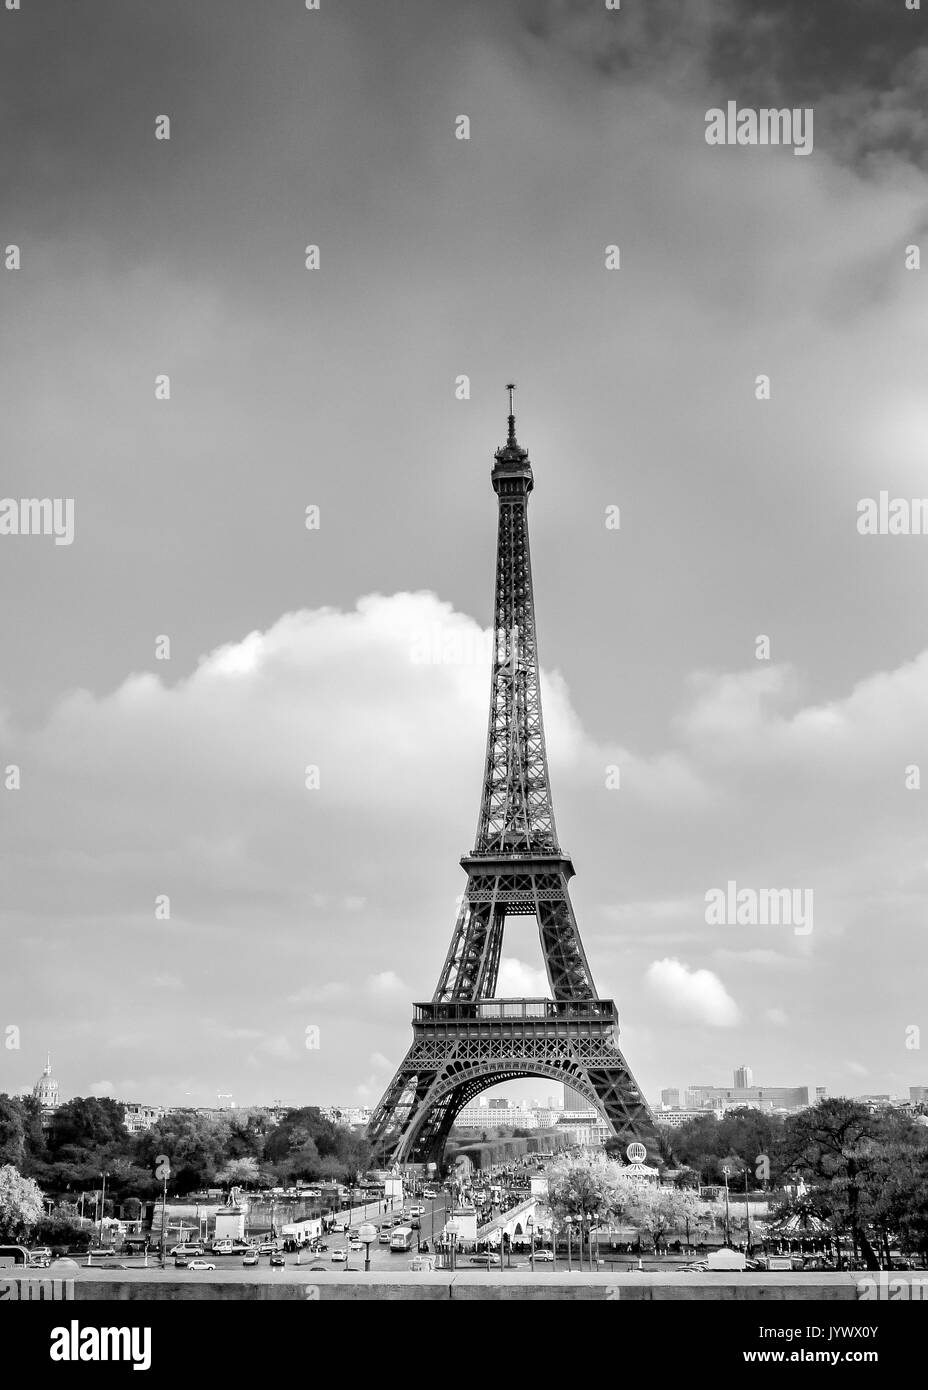 A black and white view of the Eiffel Tower on a sunny day in Paris, France Stock Photo